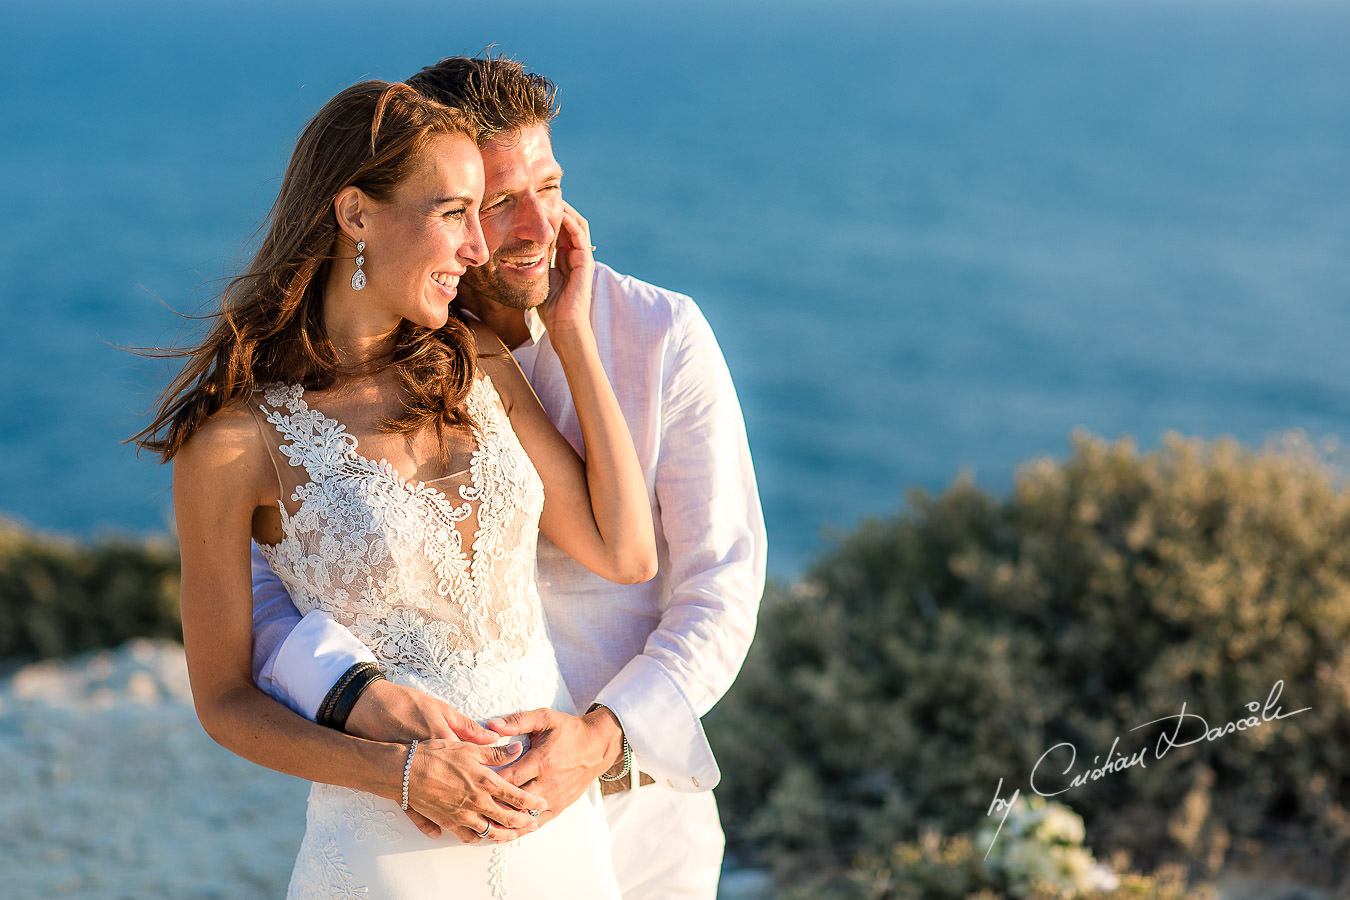 After wedding photoshoot captured by Cyprus Photographer Cristian Dascalu during a beautiful wedding at Cap St. George in Paphos.